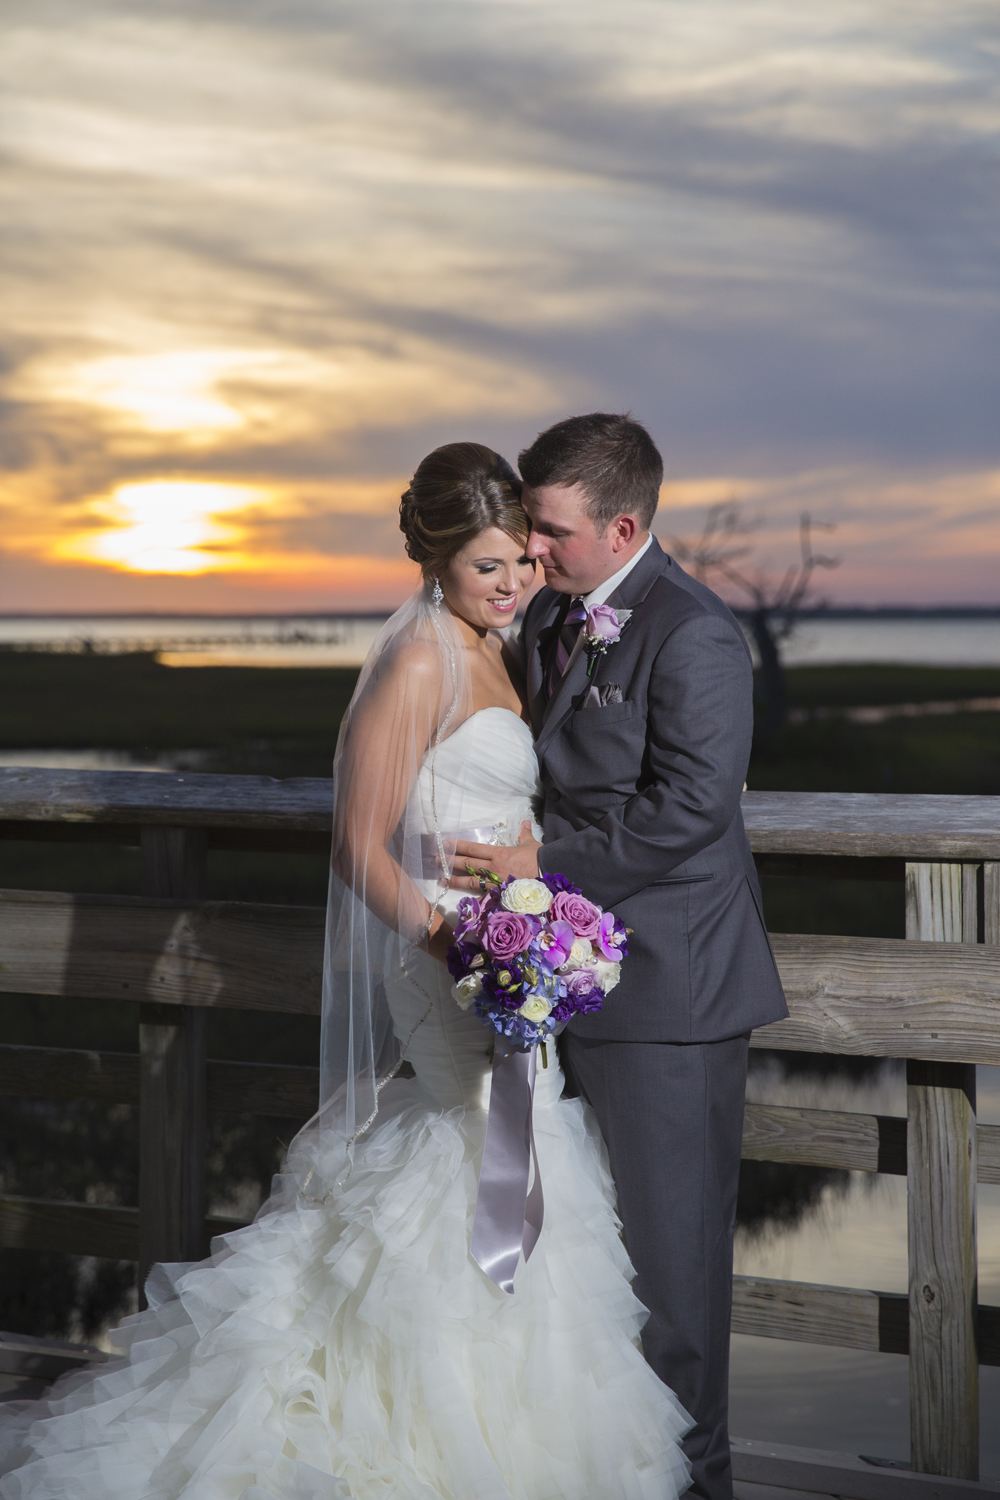 Sunset picture of bride and groom at NC Aquarium in Pine Knoll Shores